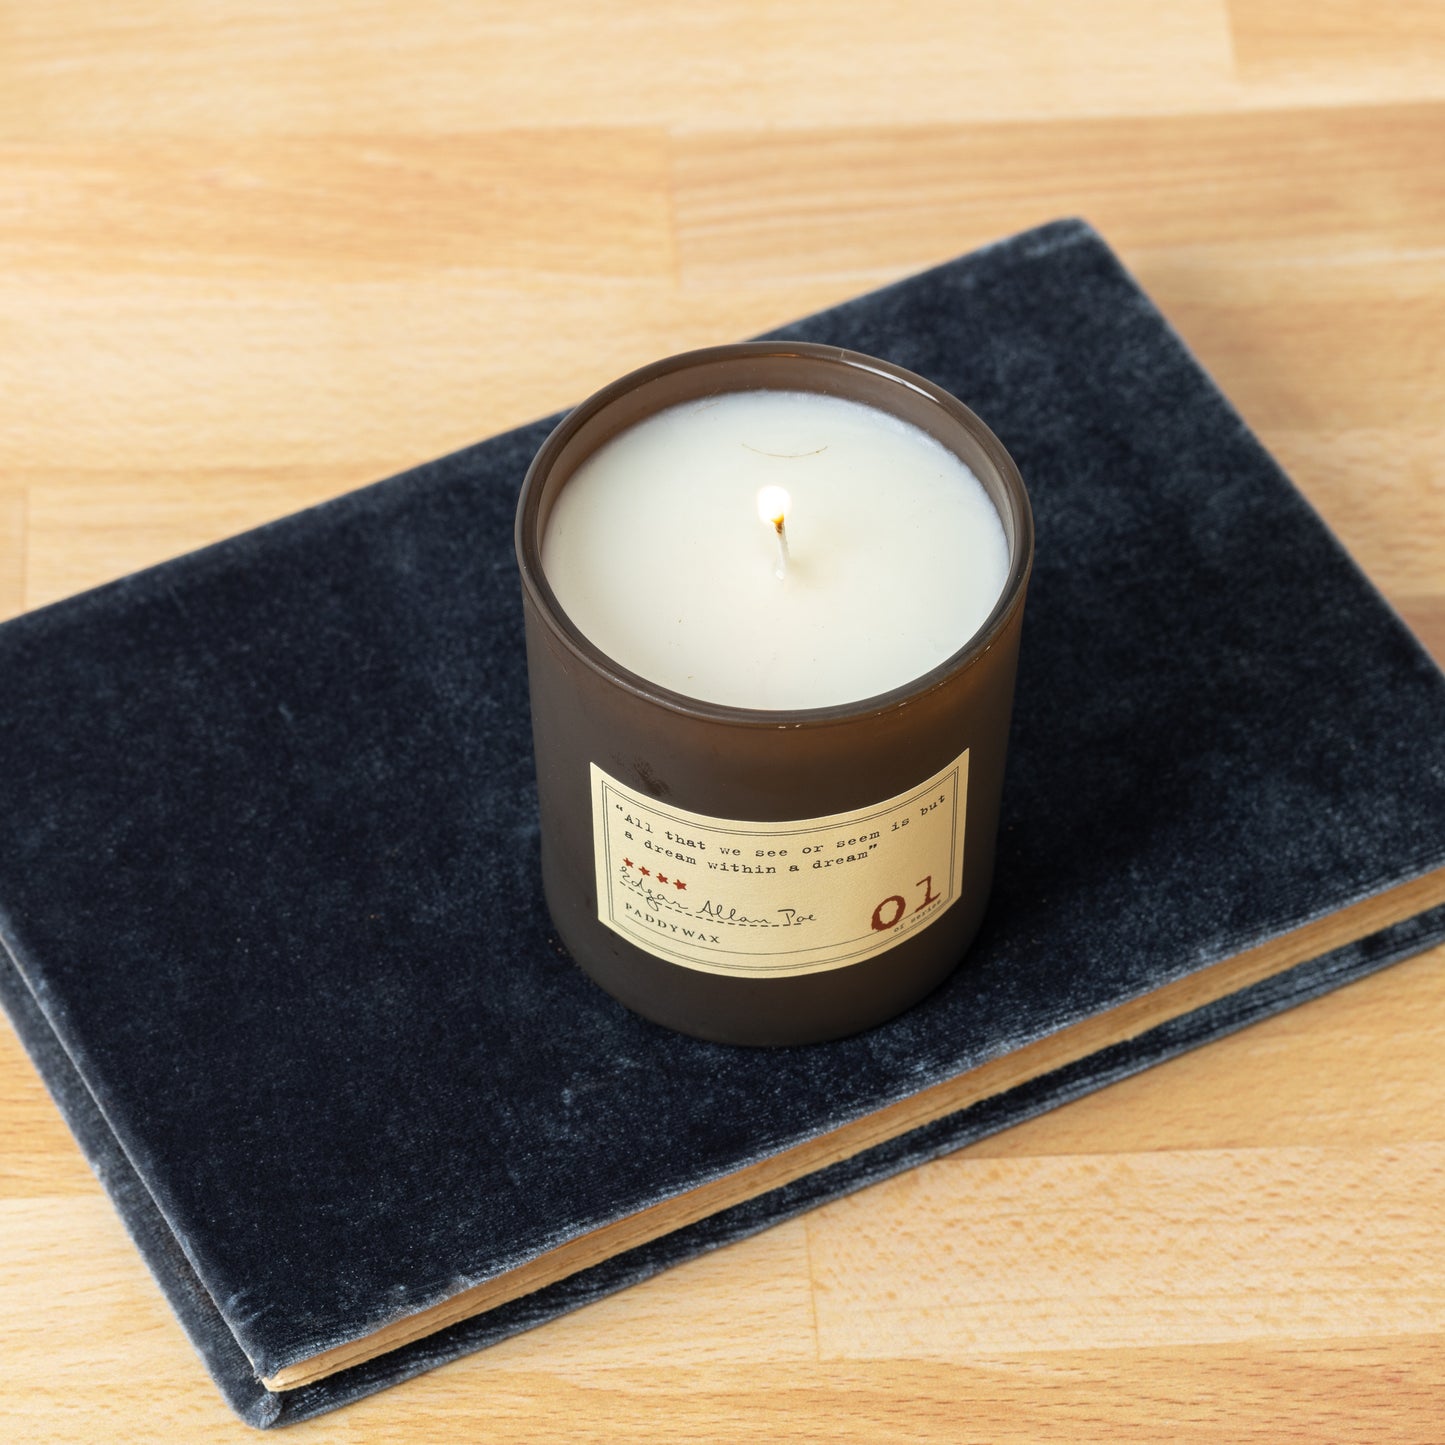 Overhead shot of Library Edgar Allan Poe soy wax candle with single wick burning on top of book on hardwood surface